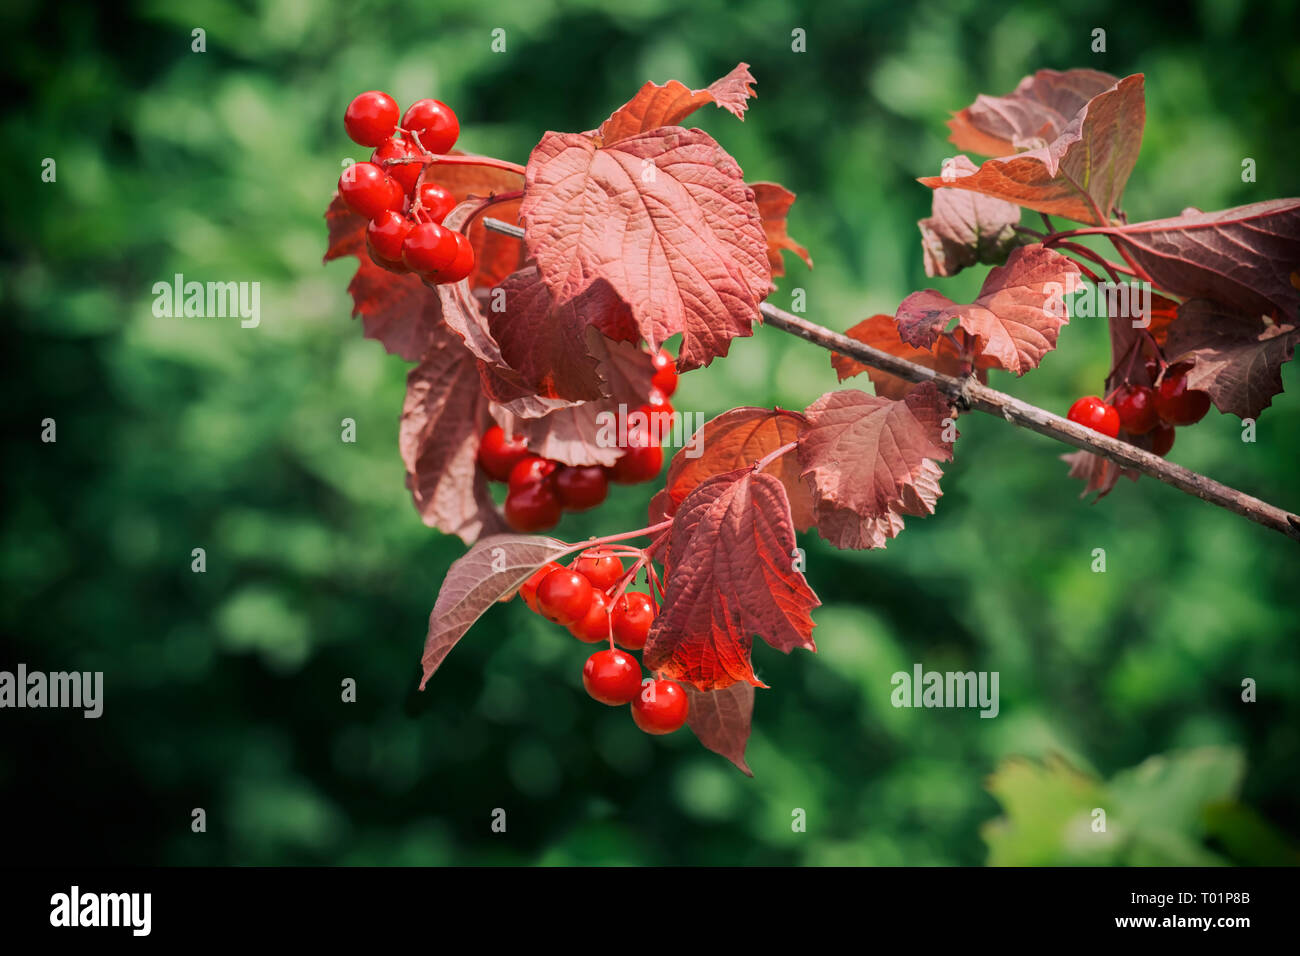 Ripe viburnum berries on a branch with red leaves Stock Photo